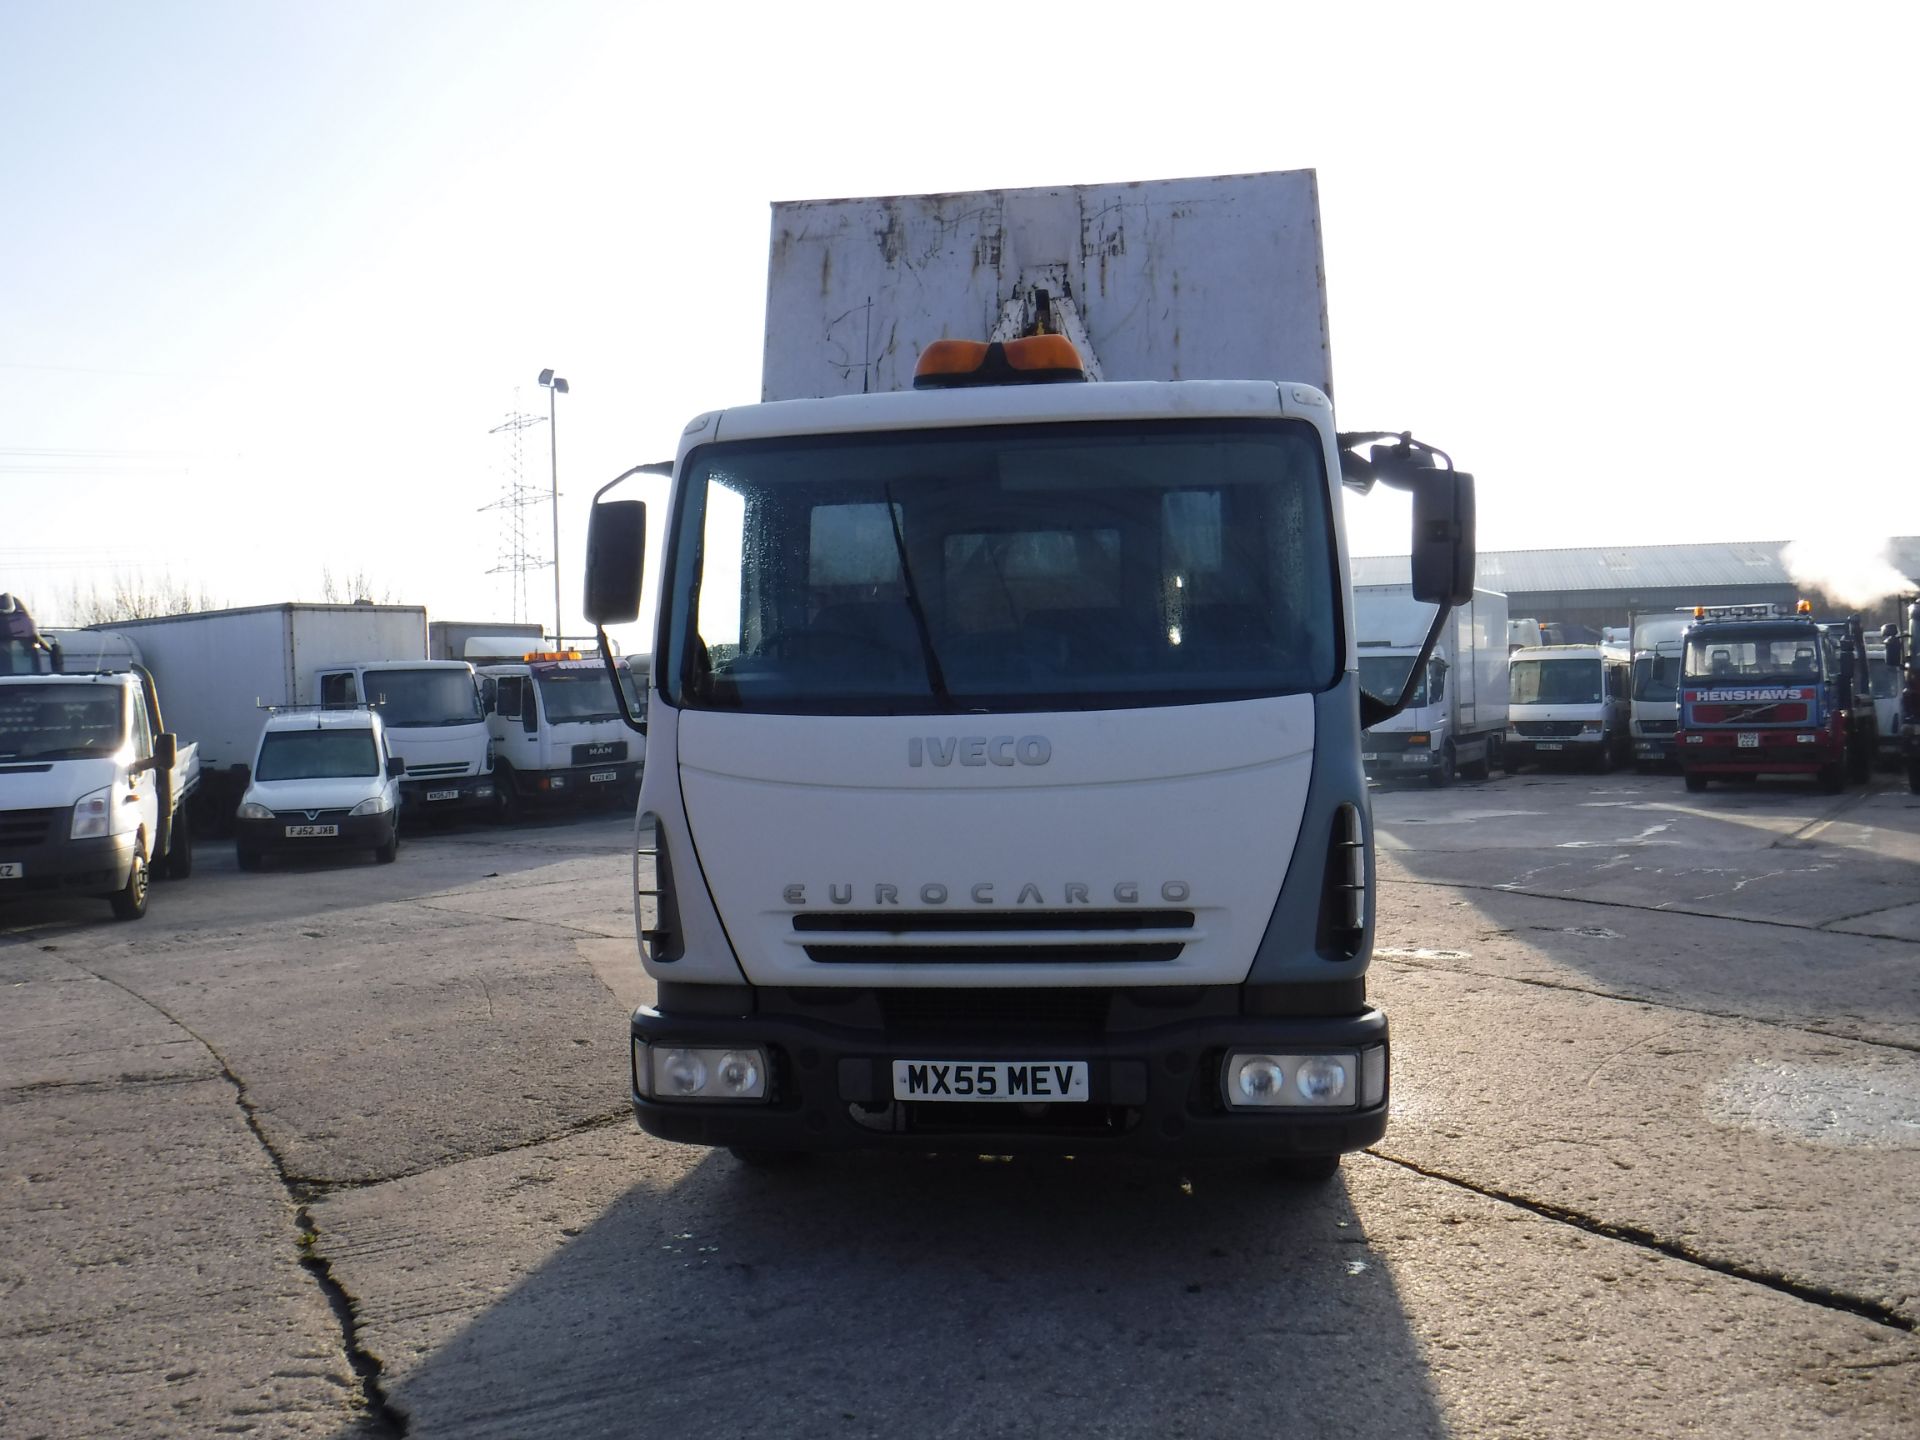 euro cargo 7500kg drive on car licence hooklift lorry 75e17 282550km very good runner - Image 2 of 7